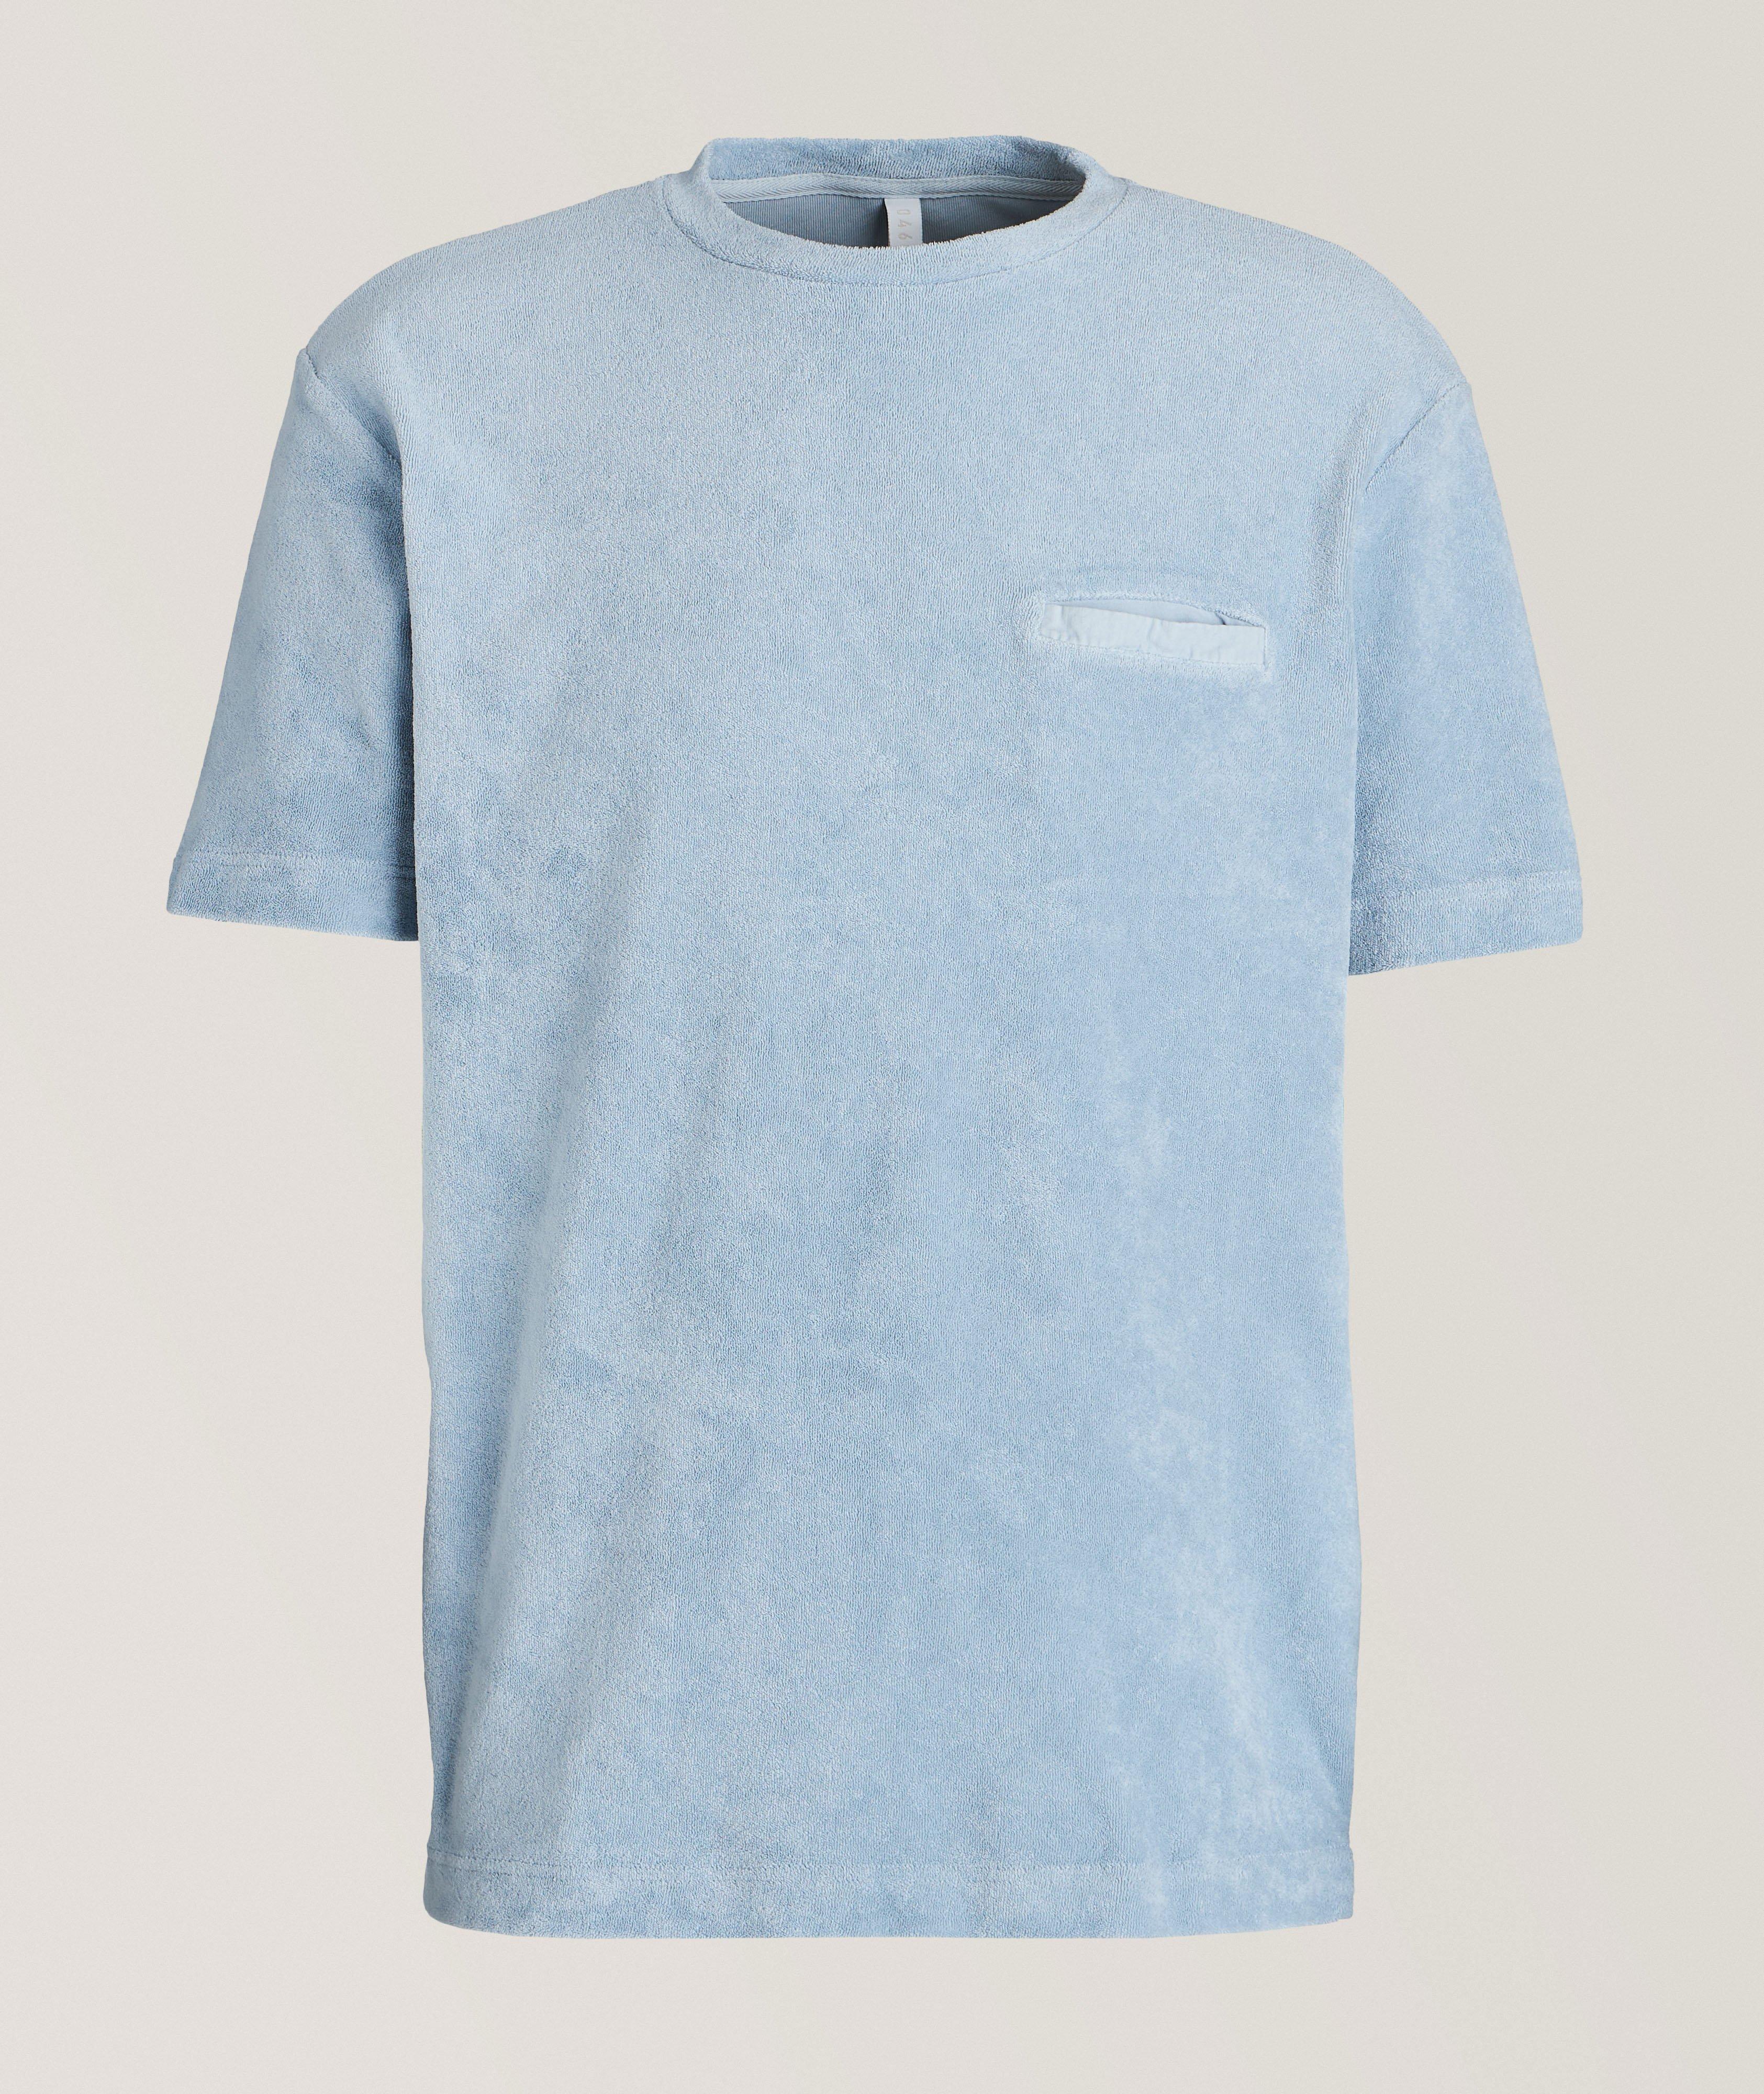 Garment-Dyed Terry Cotton T-Shirt image 0